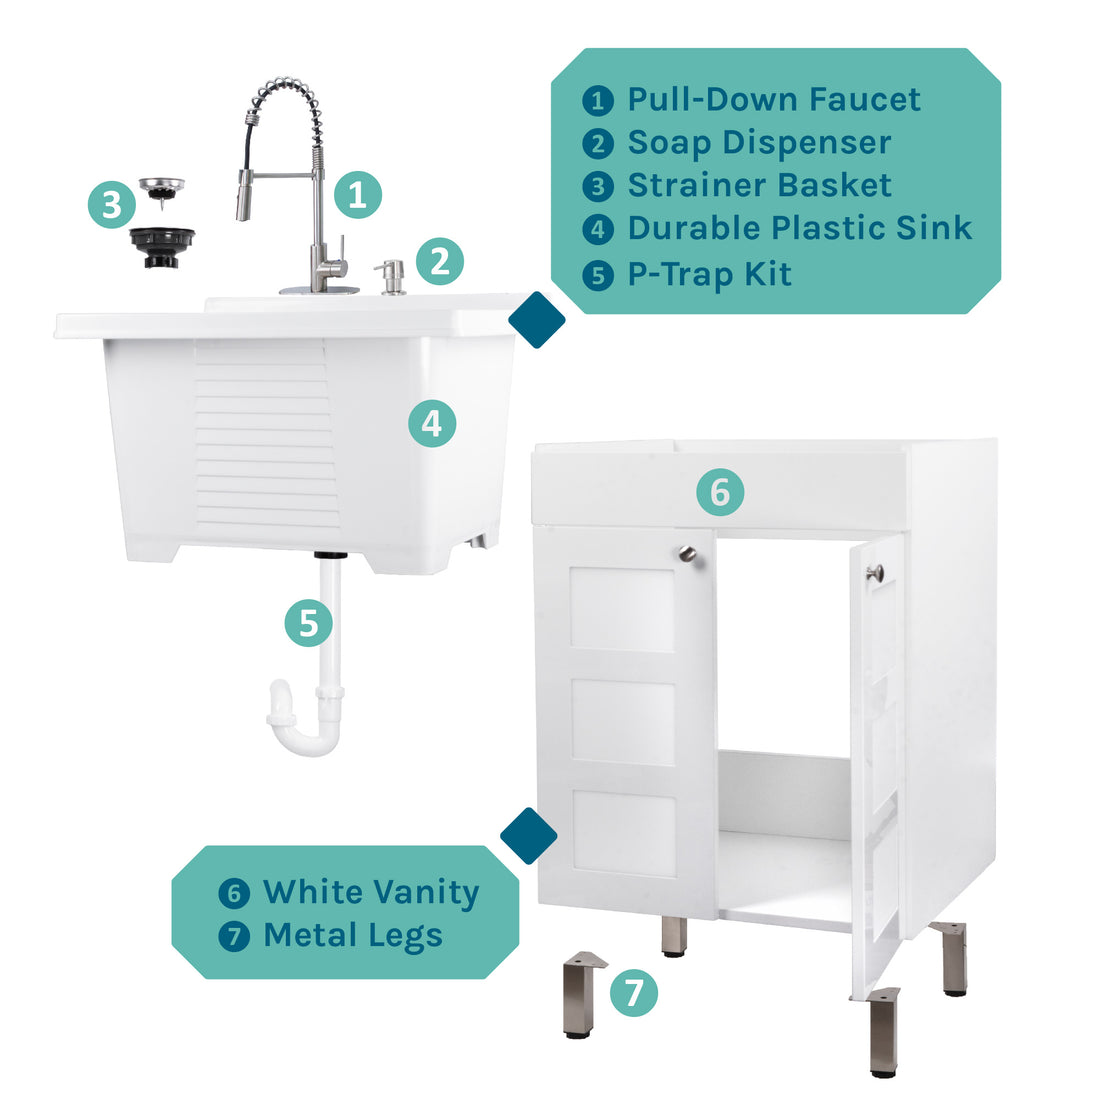 Tehila White Vanity Cabinet and White Utility Sink with Stainless Steel Finish High-Arc Coil Pull-Down Faucet - Utility sinks vanites Tehila